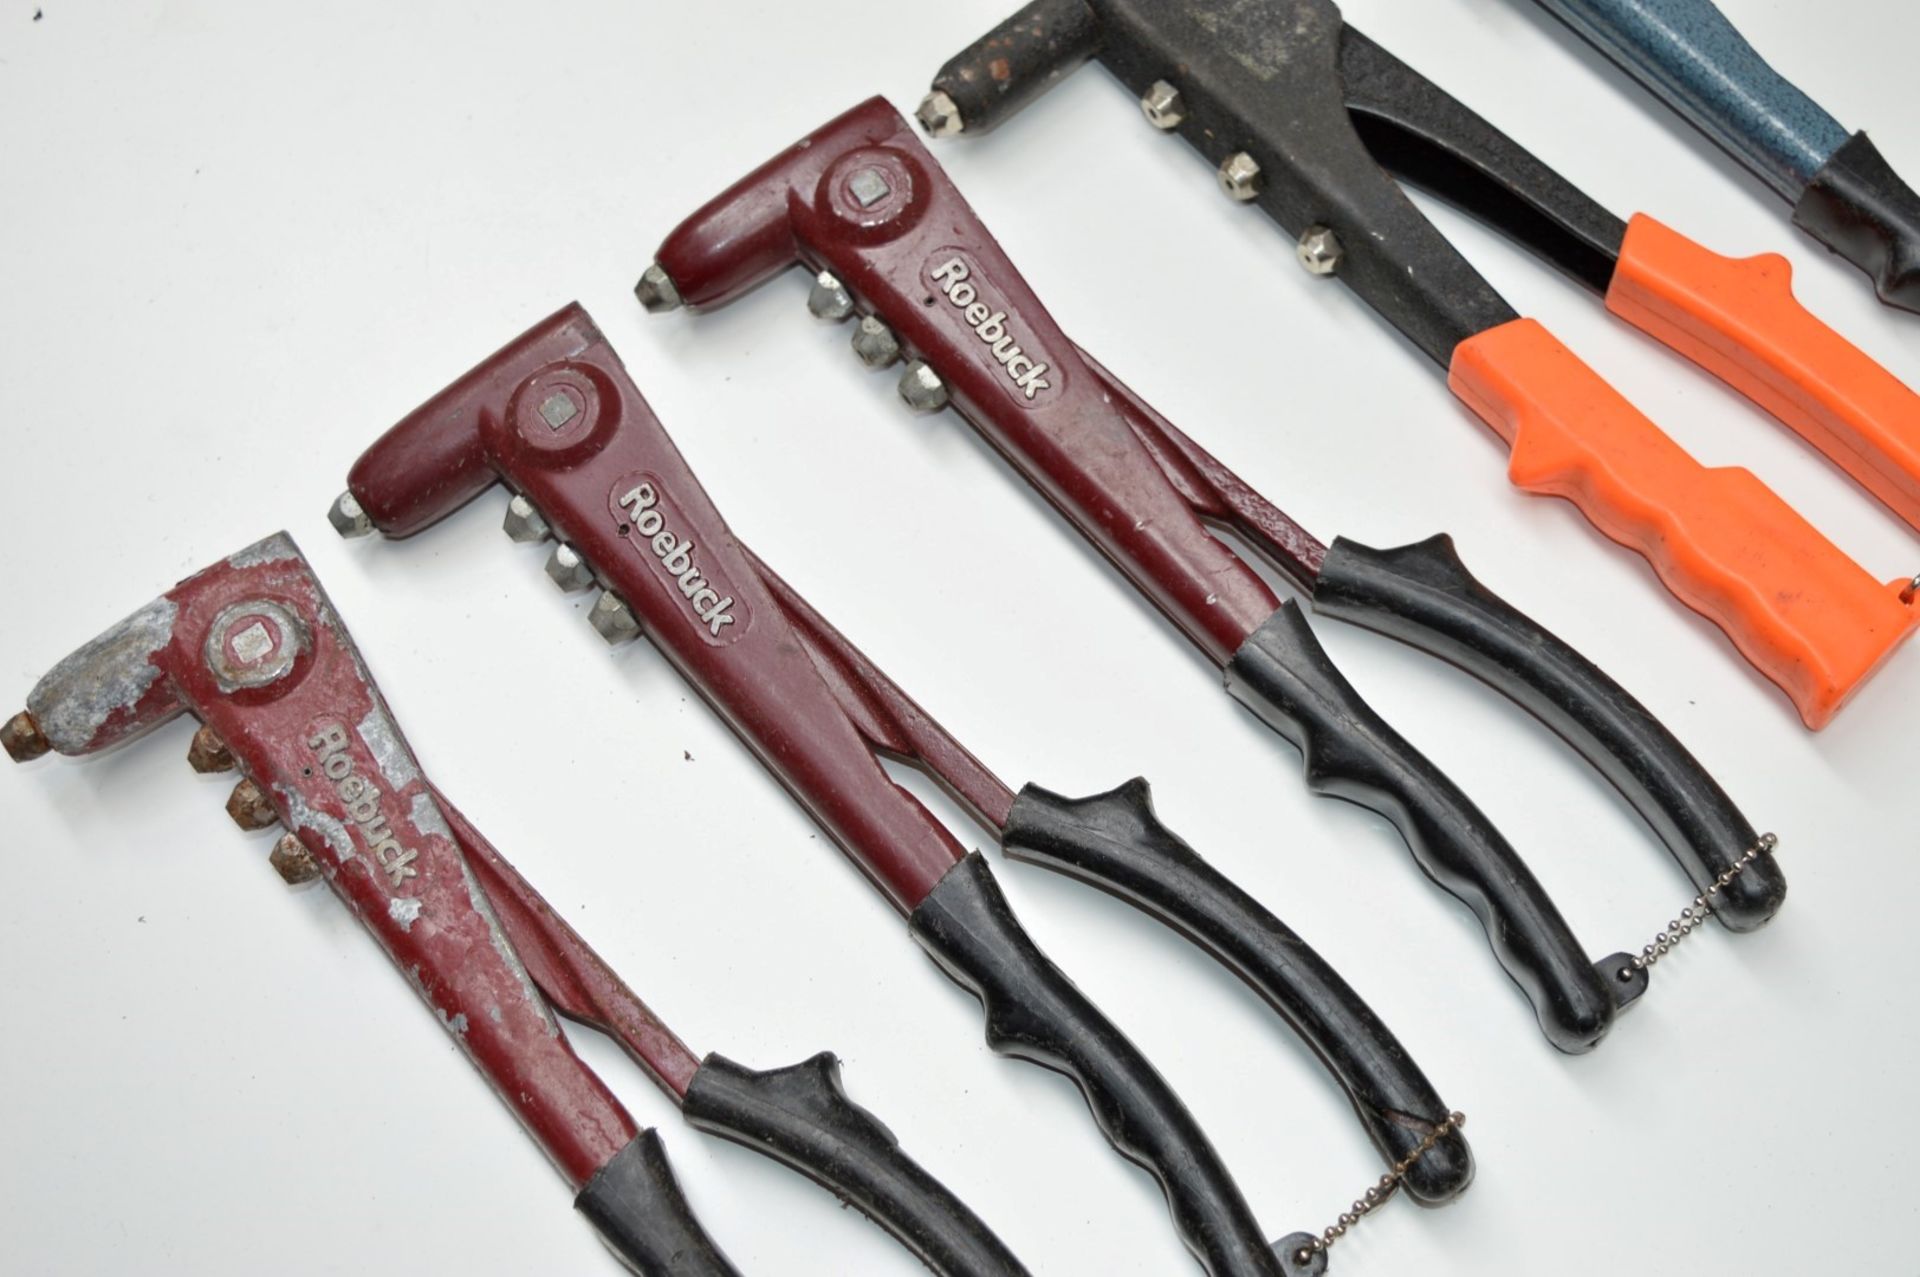 5 x  Various Hand Riveting Tools - Brands Include Roebuck and Gesipa - Ref CAT119 - CL300 - - Image 3 of 3